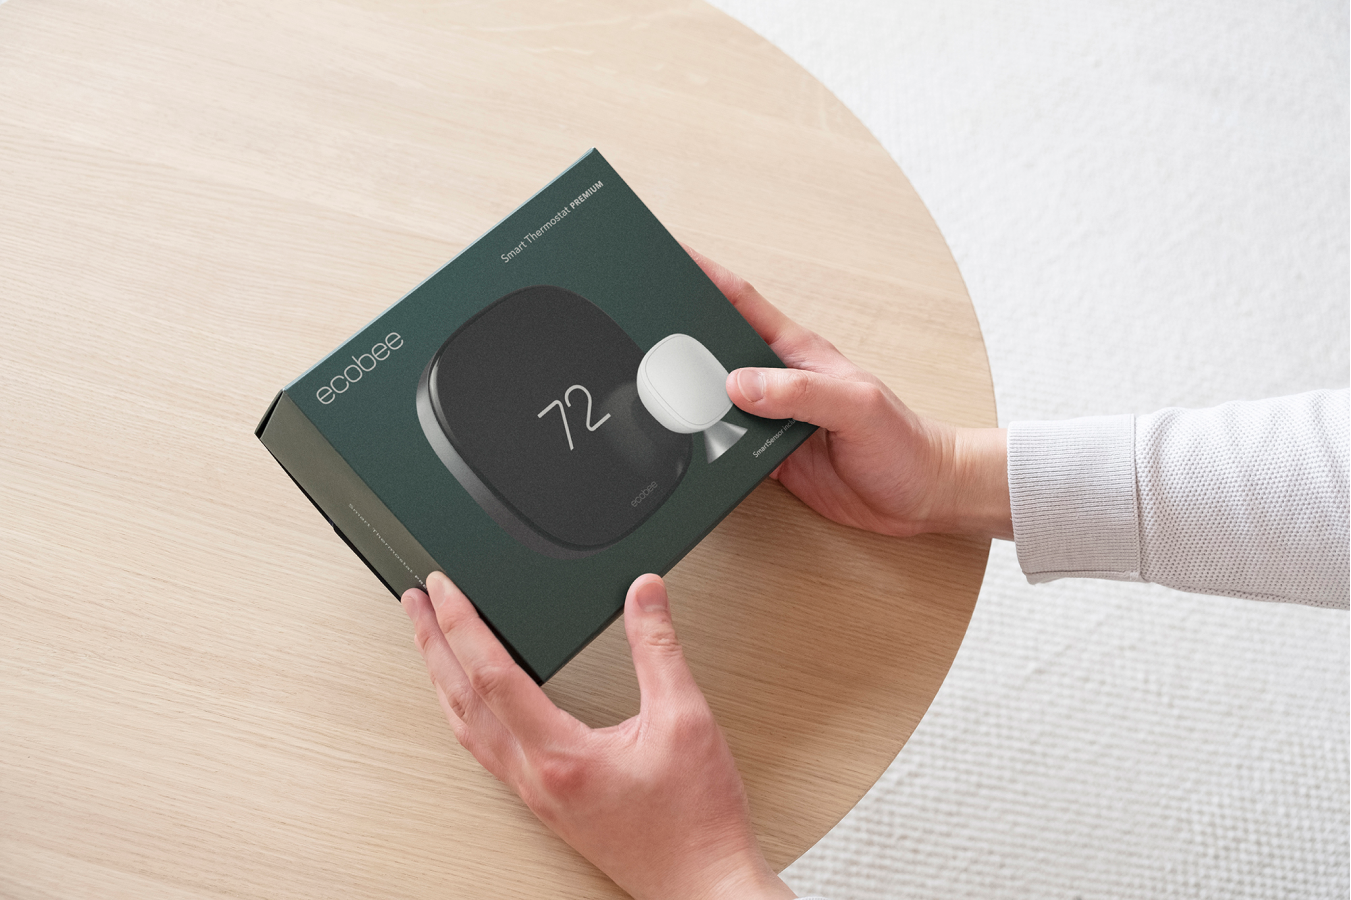 ecobee Smart Thermostat Premium with Siri and Built-In Air Quality Monitor